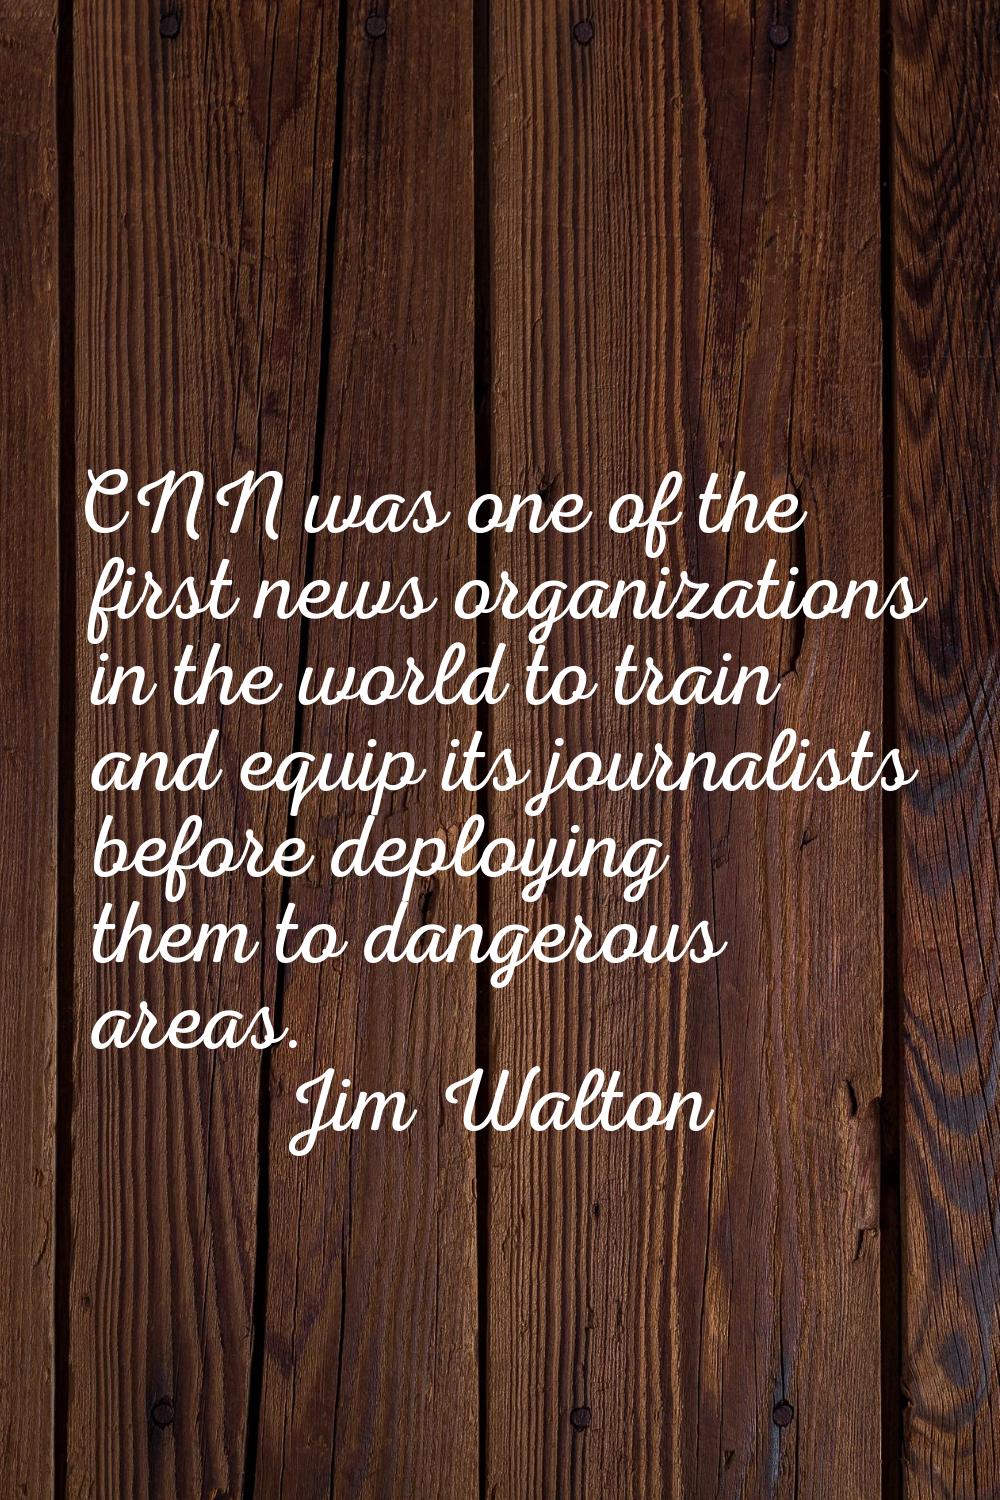 CNN was one of the first news organizations in the world to train and equip its journalists before 